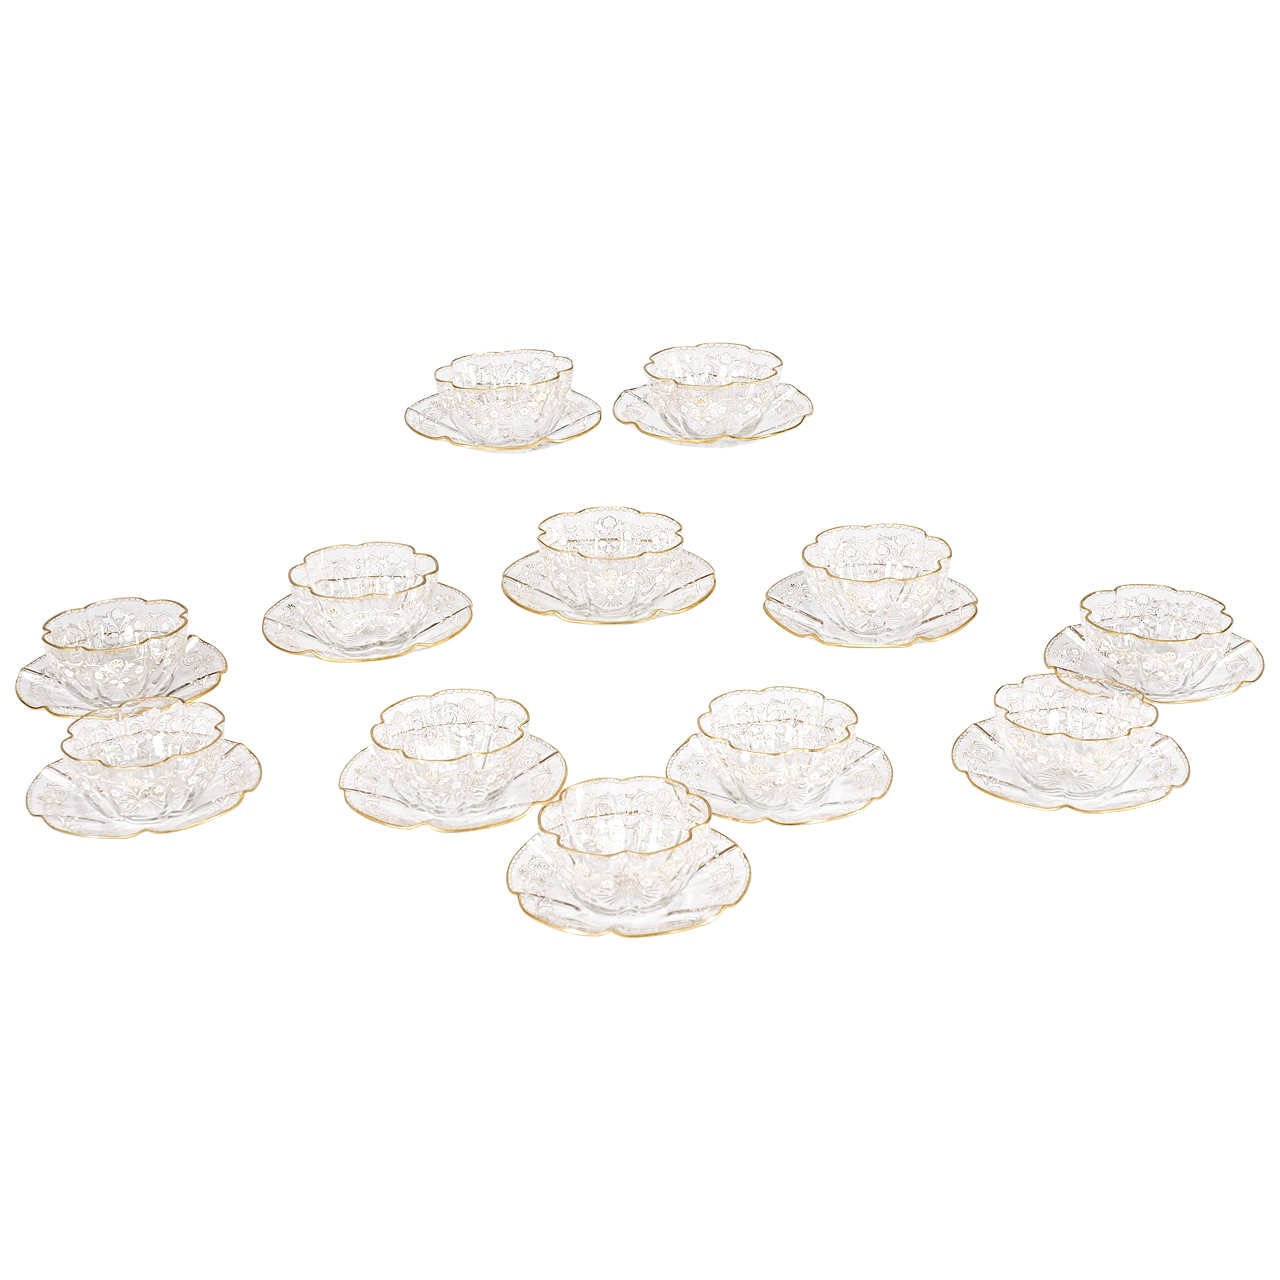 A perfect set of 12 Moser handblown crystal bowls and matching under plates in a graceful quatrefoil shape and star-cut base. Embellished with hand-painted white enamel and highlighted with gold leaf, these bowls are the elegant start to a lovely